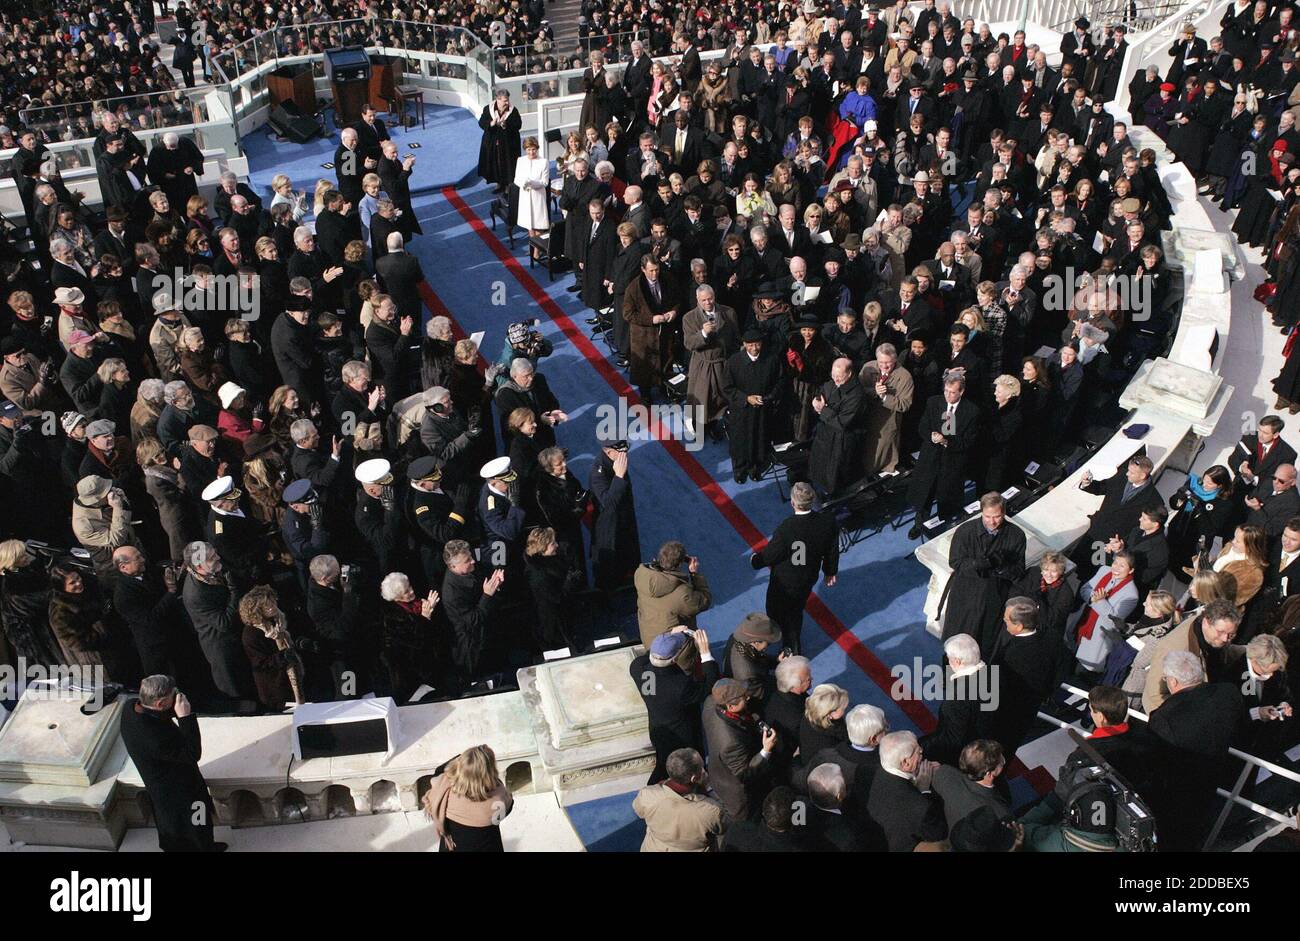 NO FILM, NO VIDEO, NO TV, NO DOCUMENTARY - Gathered diginitaries stand and applaud President George W. Bush as he makes his way onto the inaugural platform, January 20, 2005, in Washington, D.C, to be sworn in for a second term as U.S. President. Washington, DC, USA, on January 20, 2005. Photo by Chuck Kennedy/US News Story Slugged/KRT/ABACA. Stock Photo